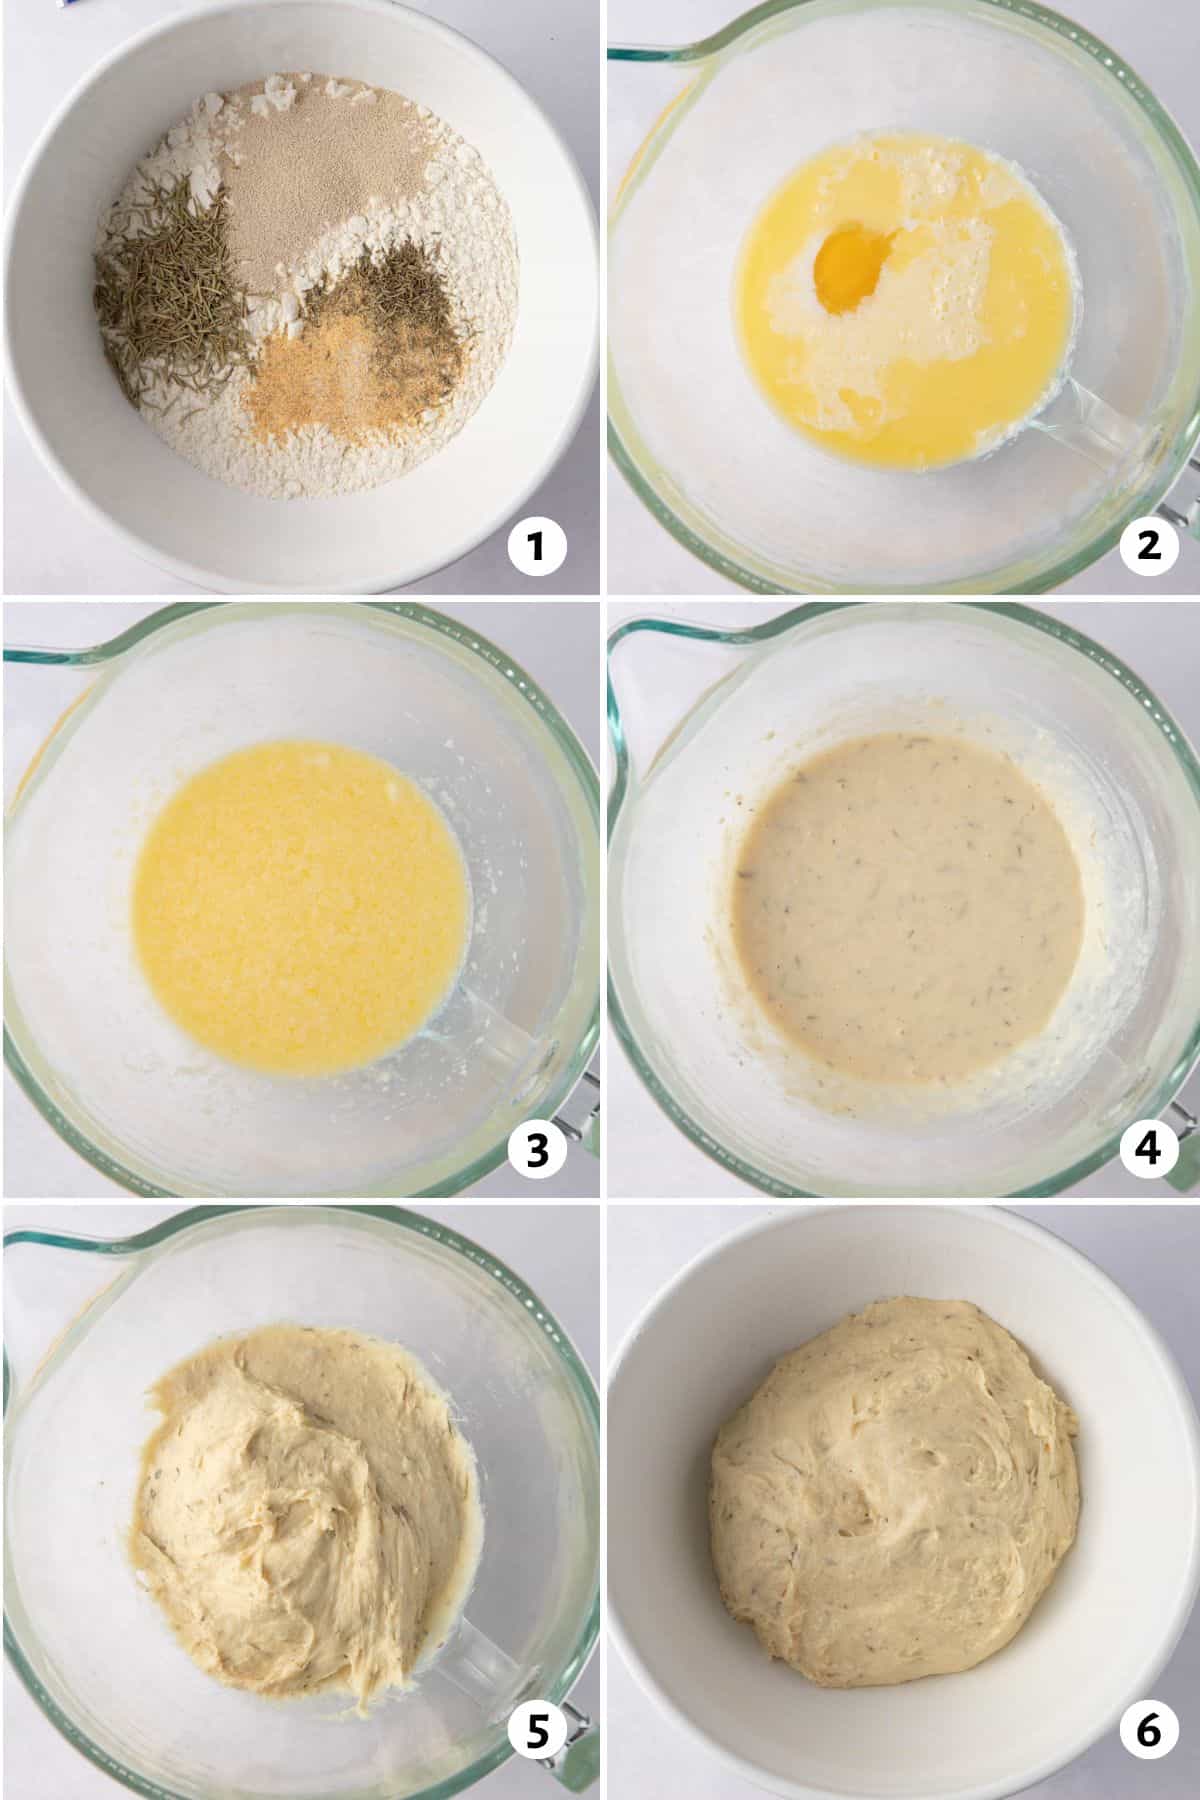 6 image collage mixing bread dough in one bowl: add dry ingredients to a bowl, add wet ingredients to a stand mixer bowl, combine half dry to the wet ingredients, add remaing dry ingredients, combine dough completely, and dough after rise.